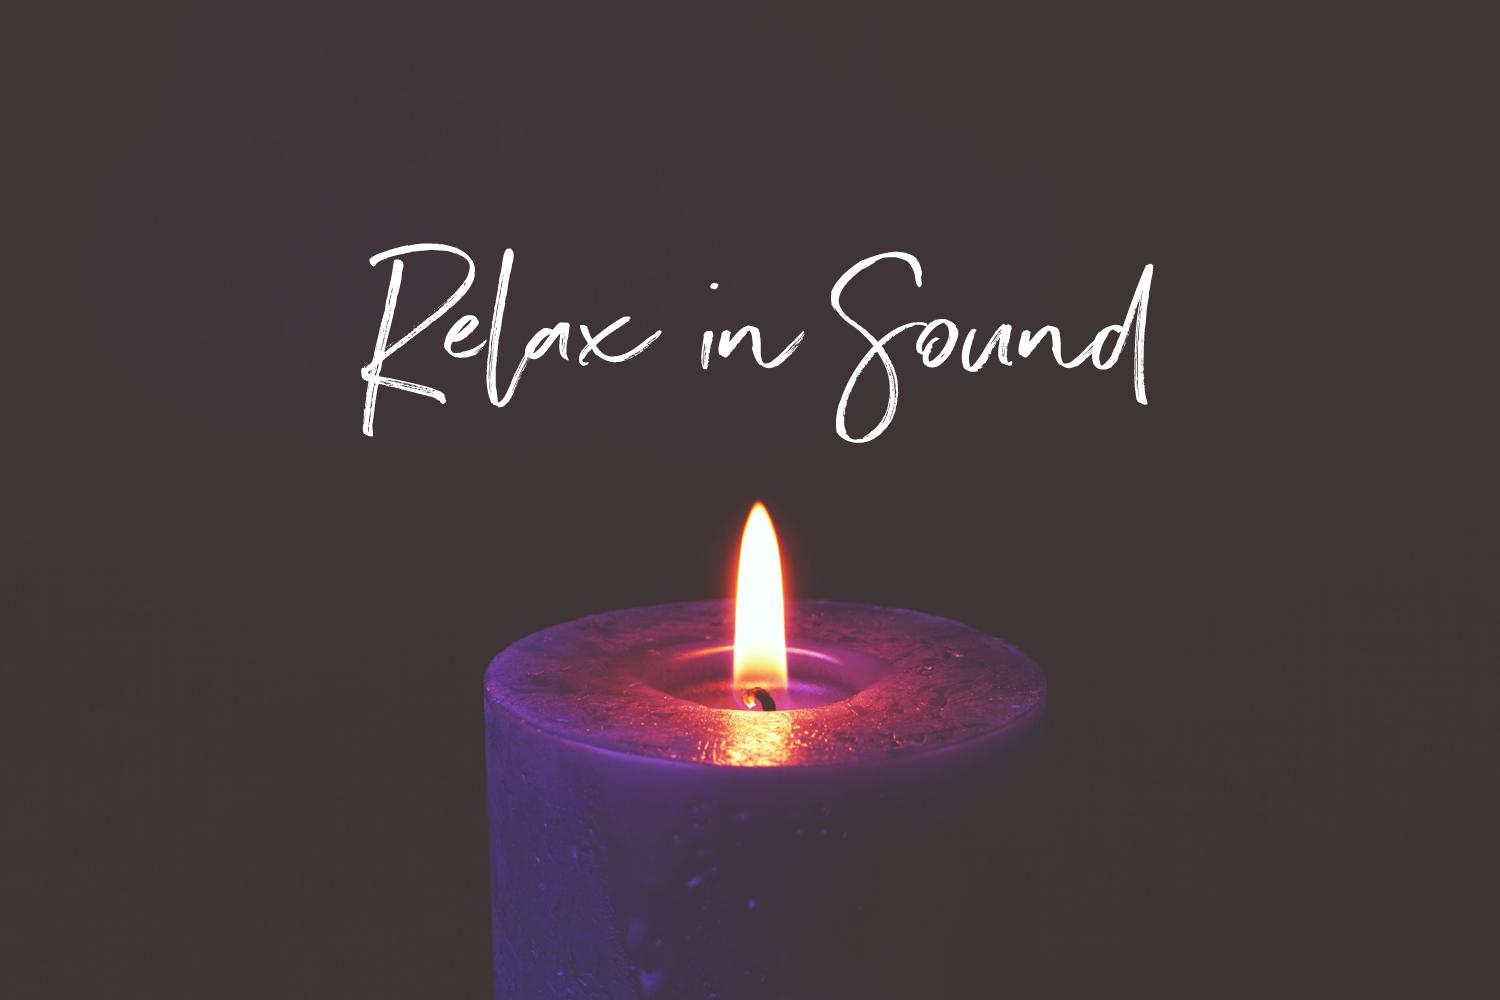 September 23rd 2020 - Relax in Sound